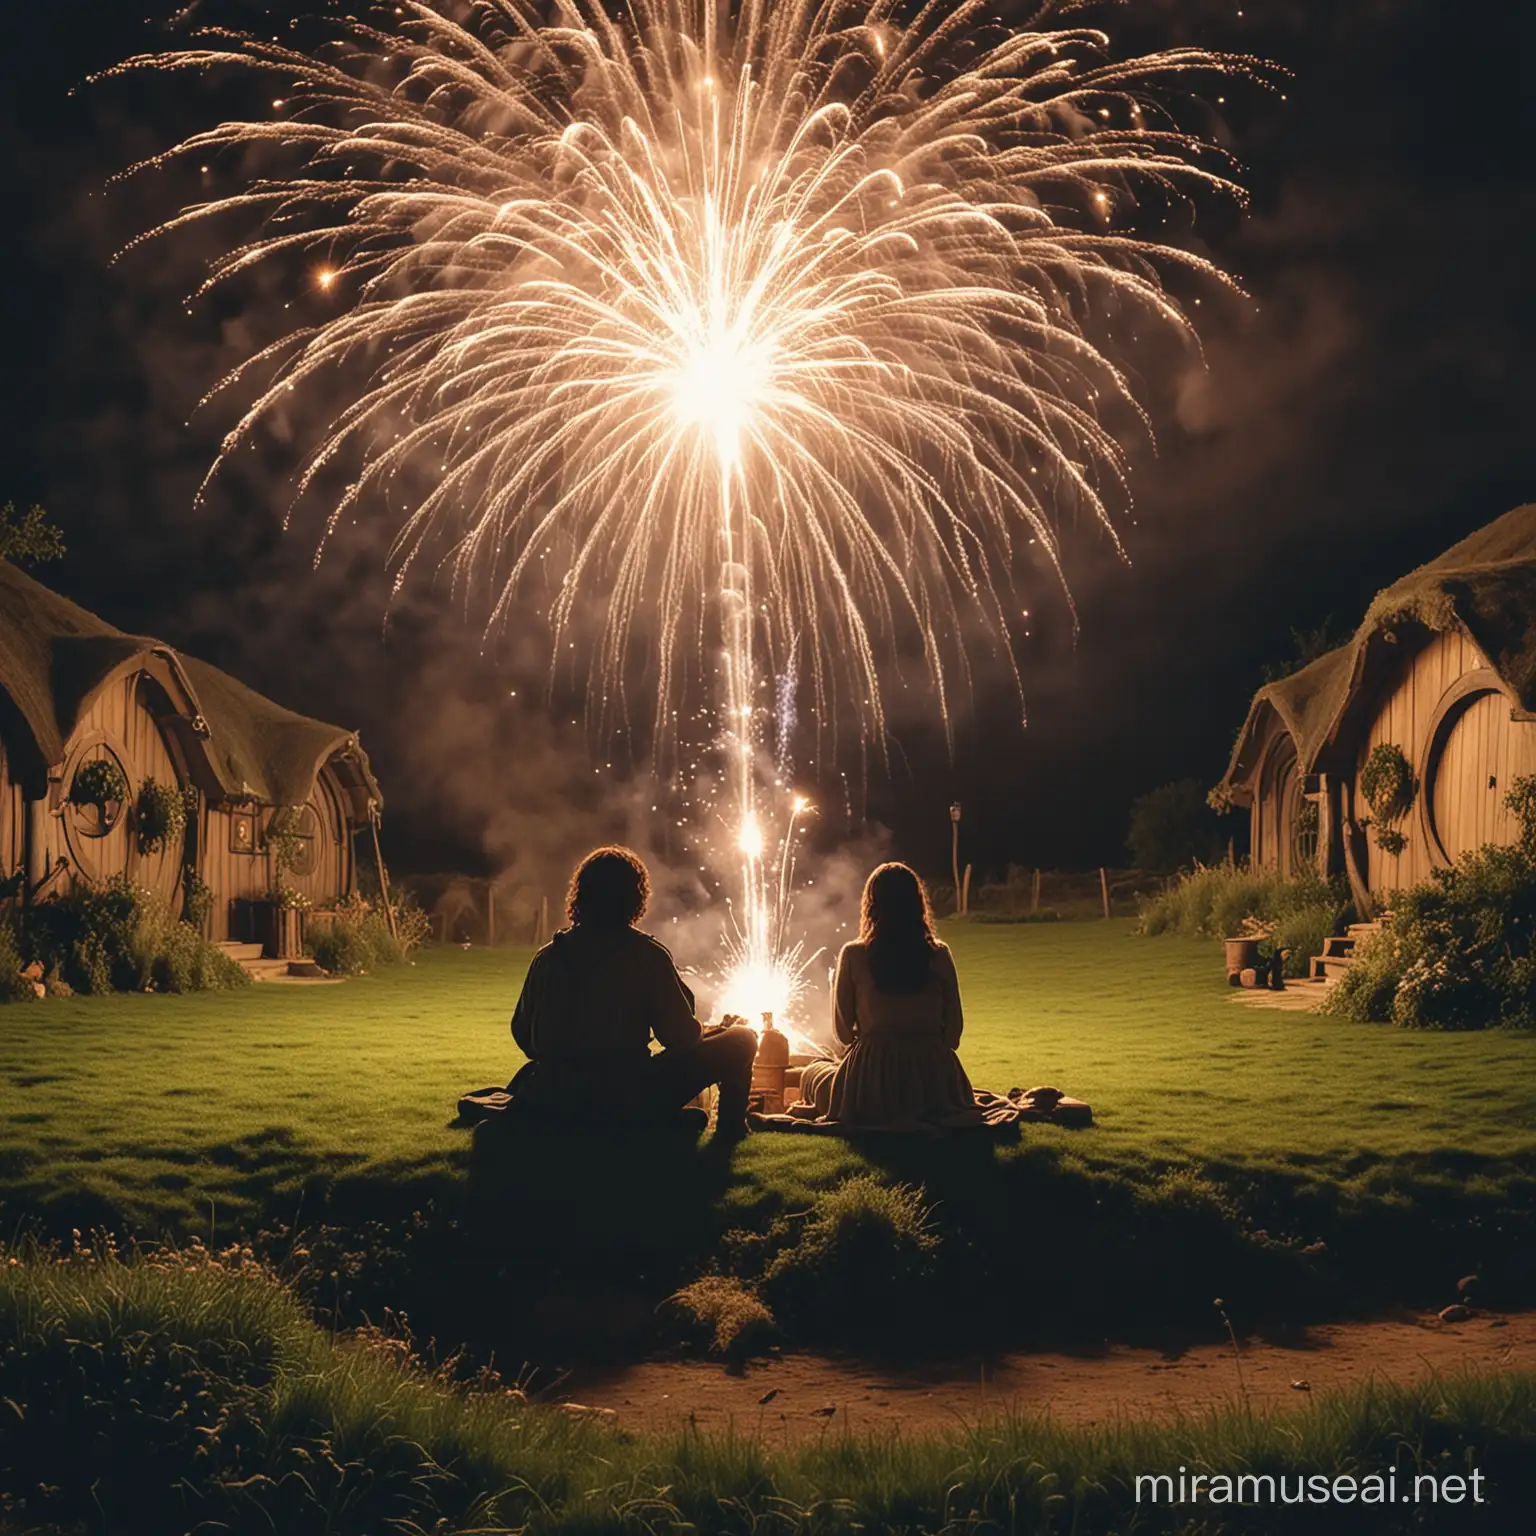 Couple Enjoying Fireworks in the Shire Lord of the Rings Inspired Art